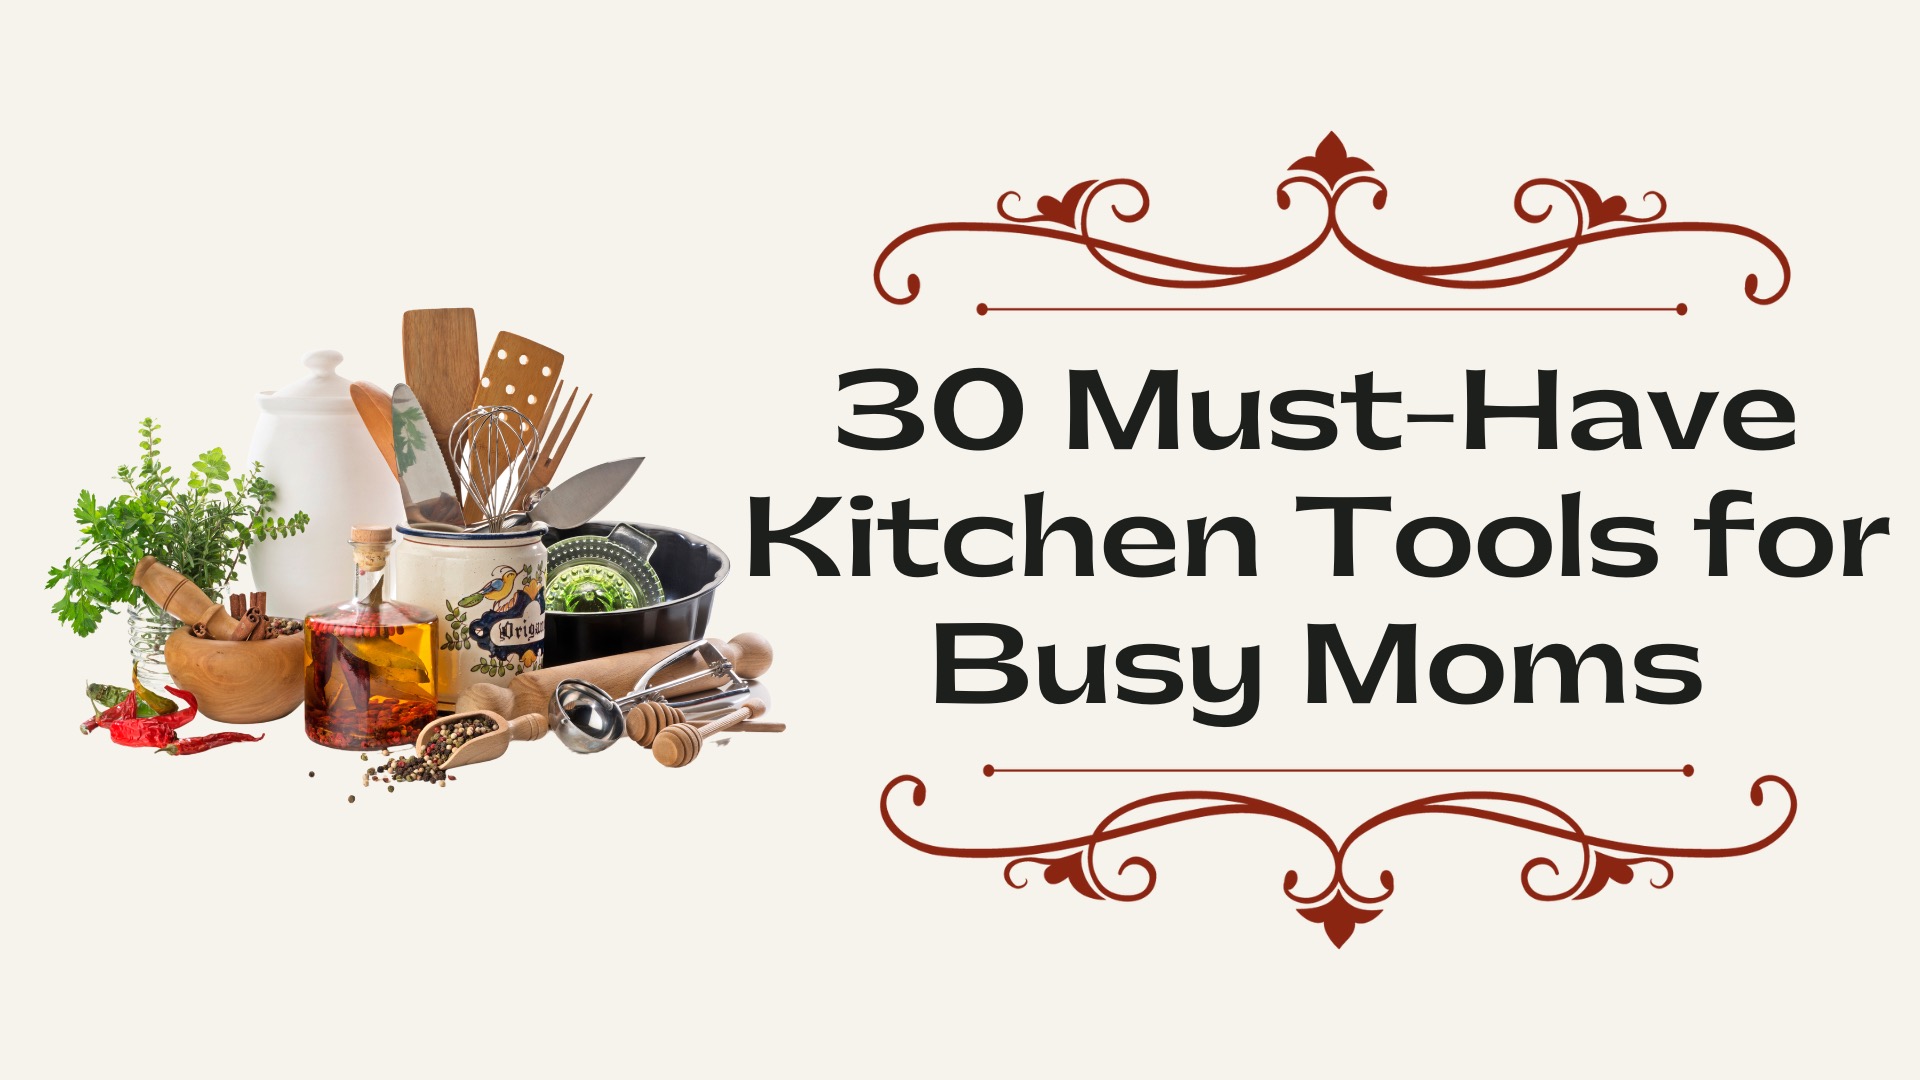 30 Must-Have Kitchen Tools for Busy Moms